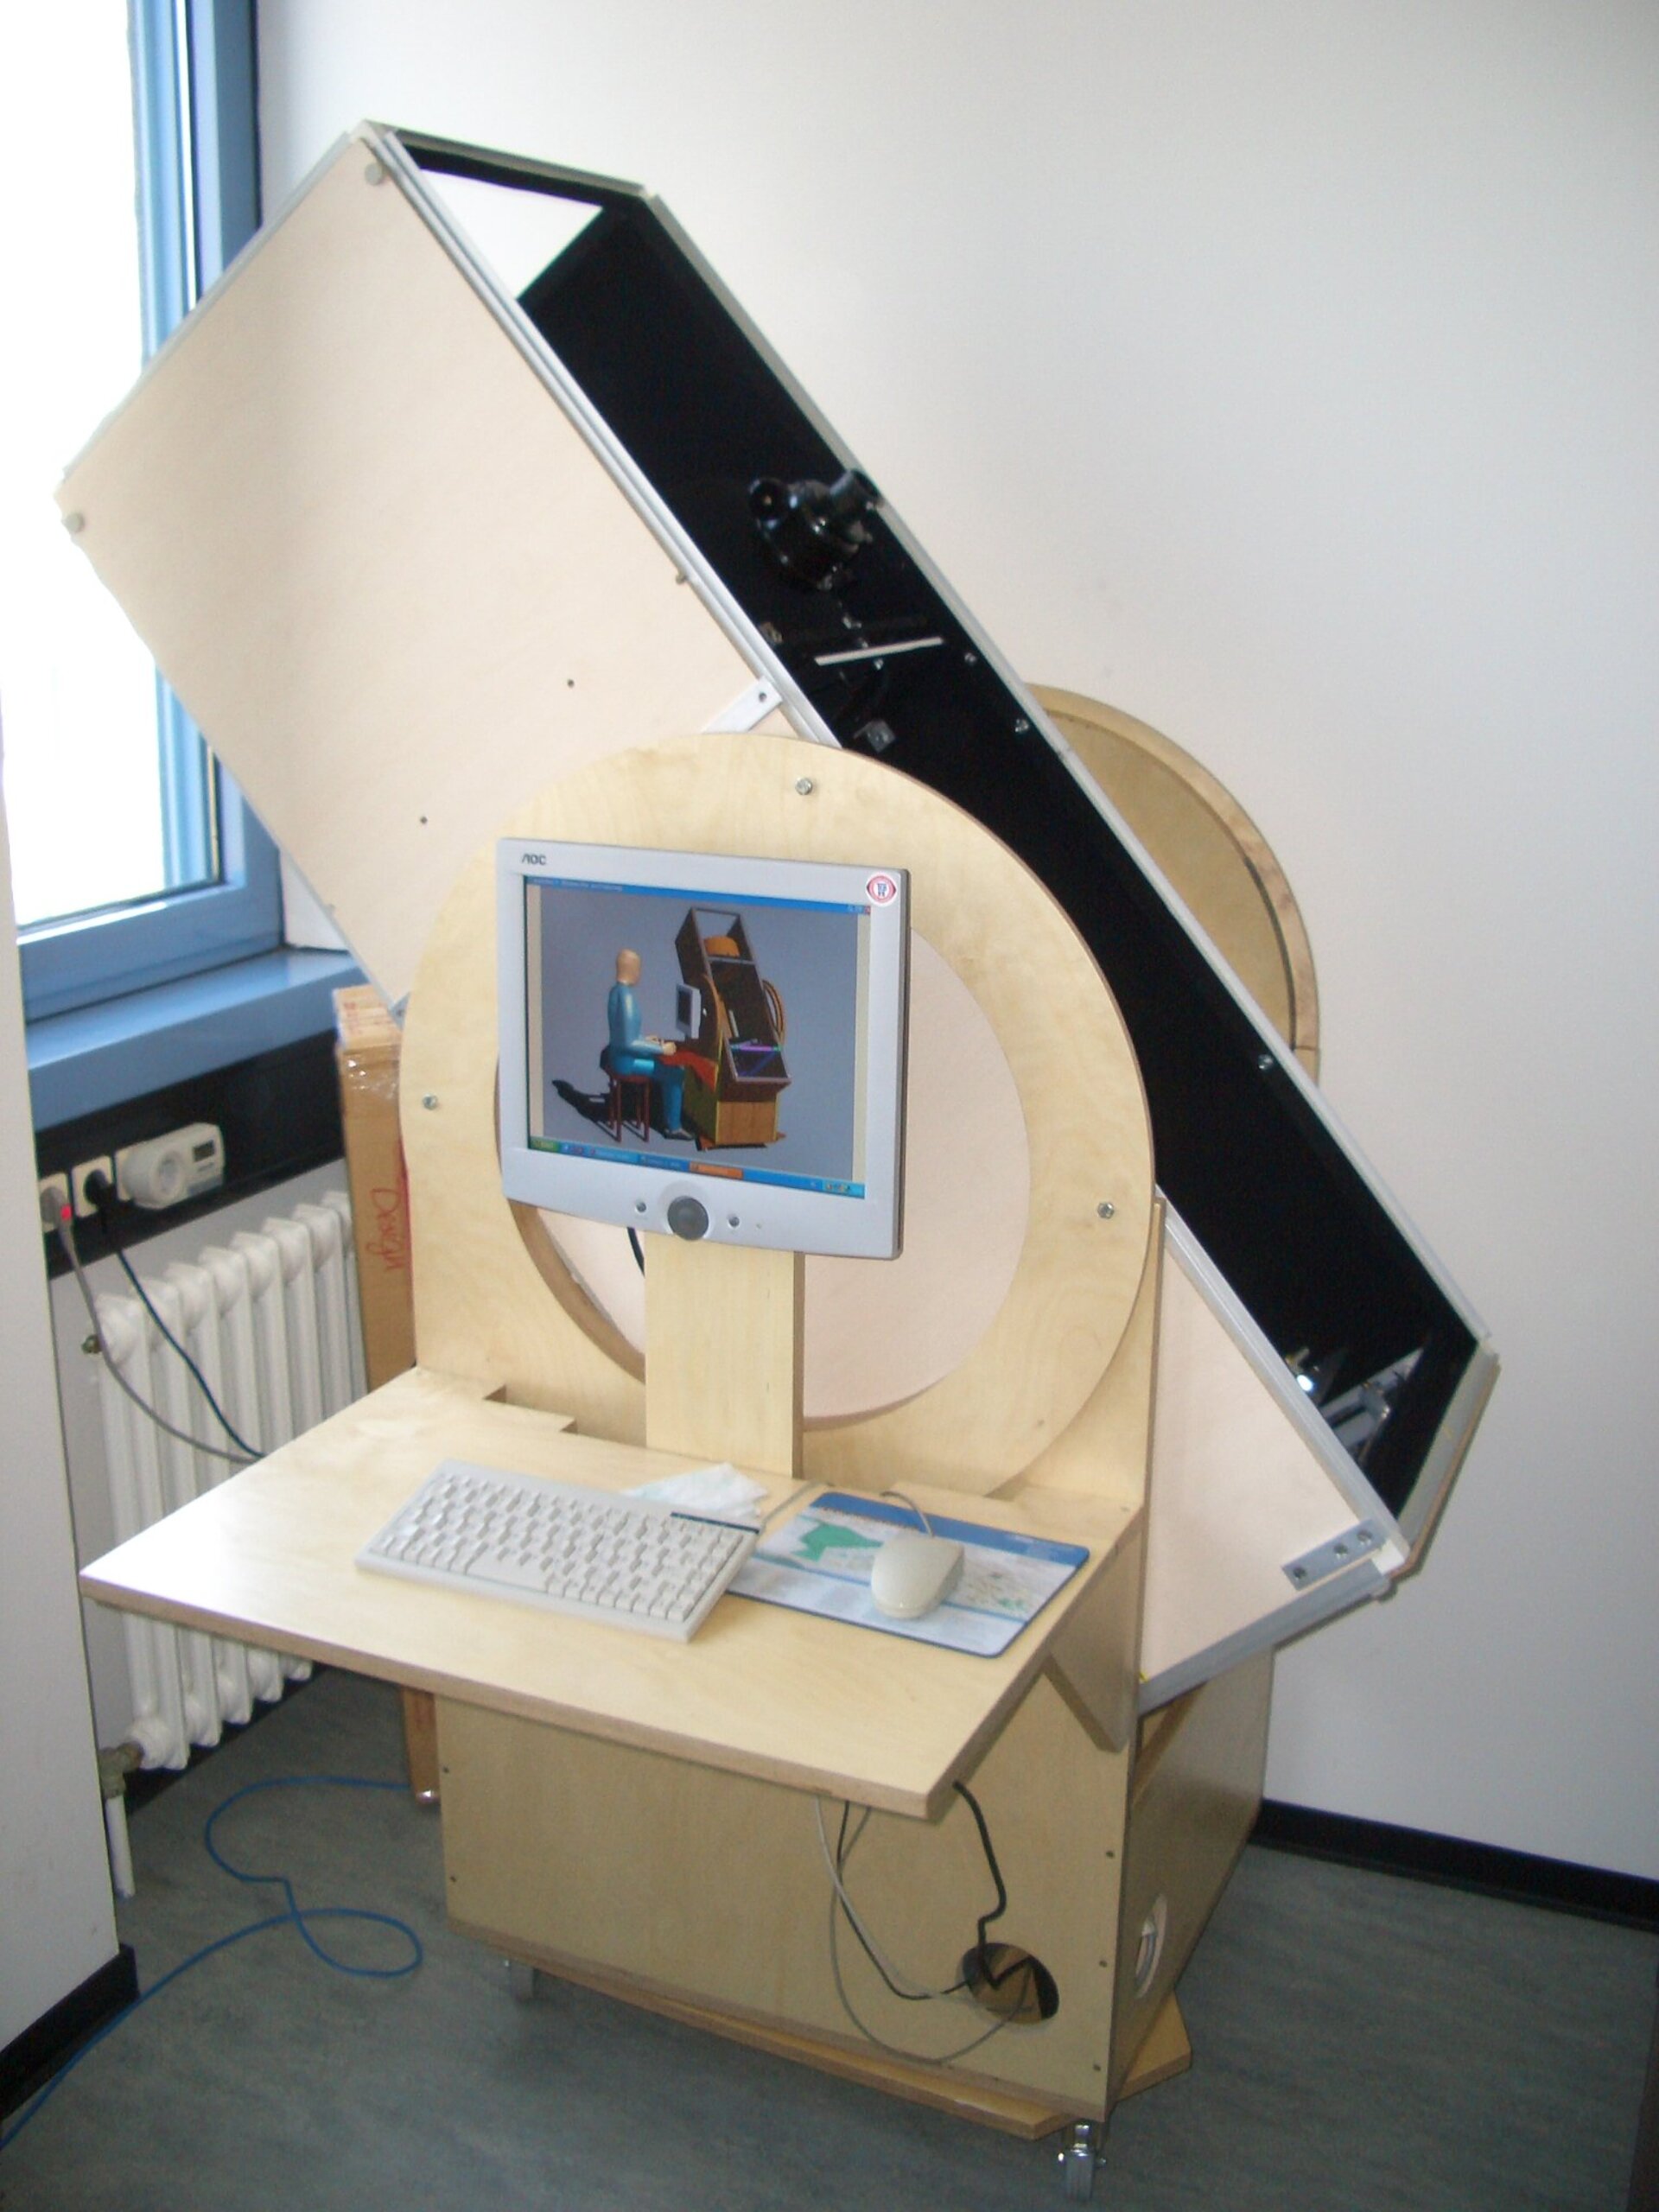 Collimation testbed of the Dobson telescope